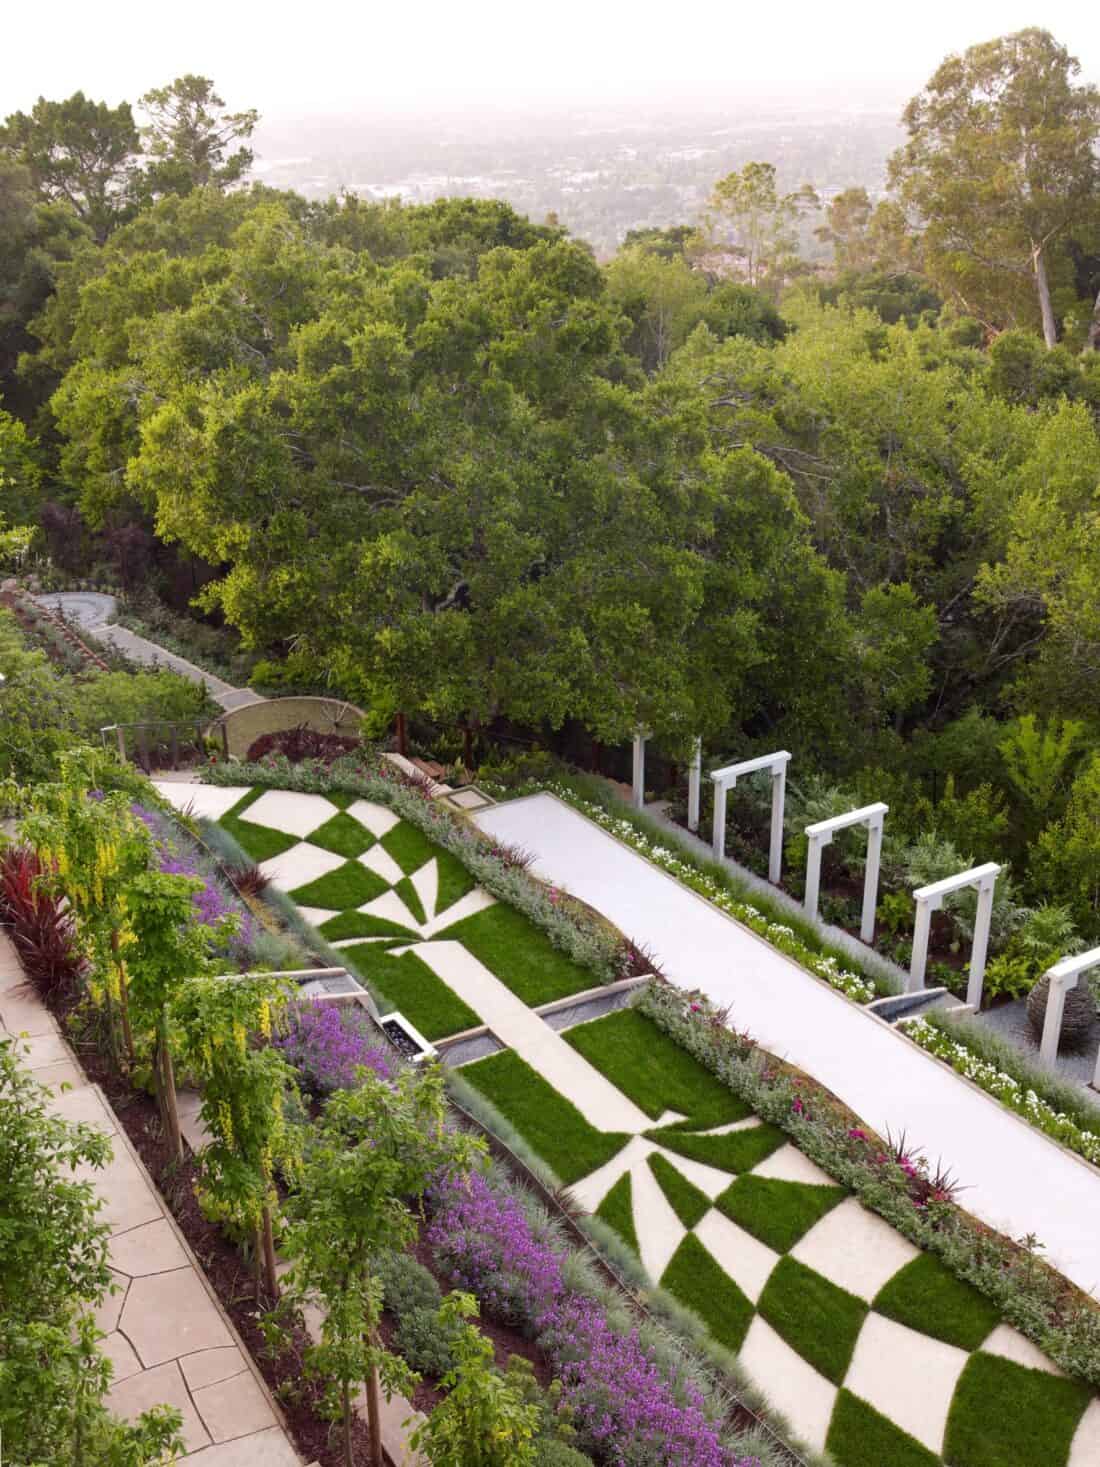 A beautifully landscaped garden with patterned lawn areas and purple flowers. A pathway with white archways leads through the Garden Gallery. Dense green trees and a distant Los Gatos cityscape are visible in the background, while greenery lines the path and garden edges.